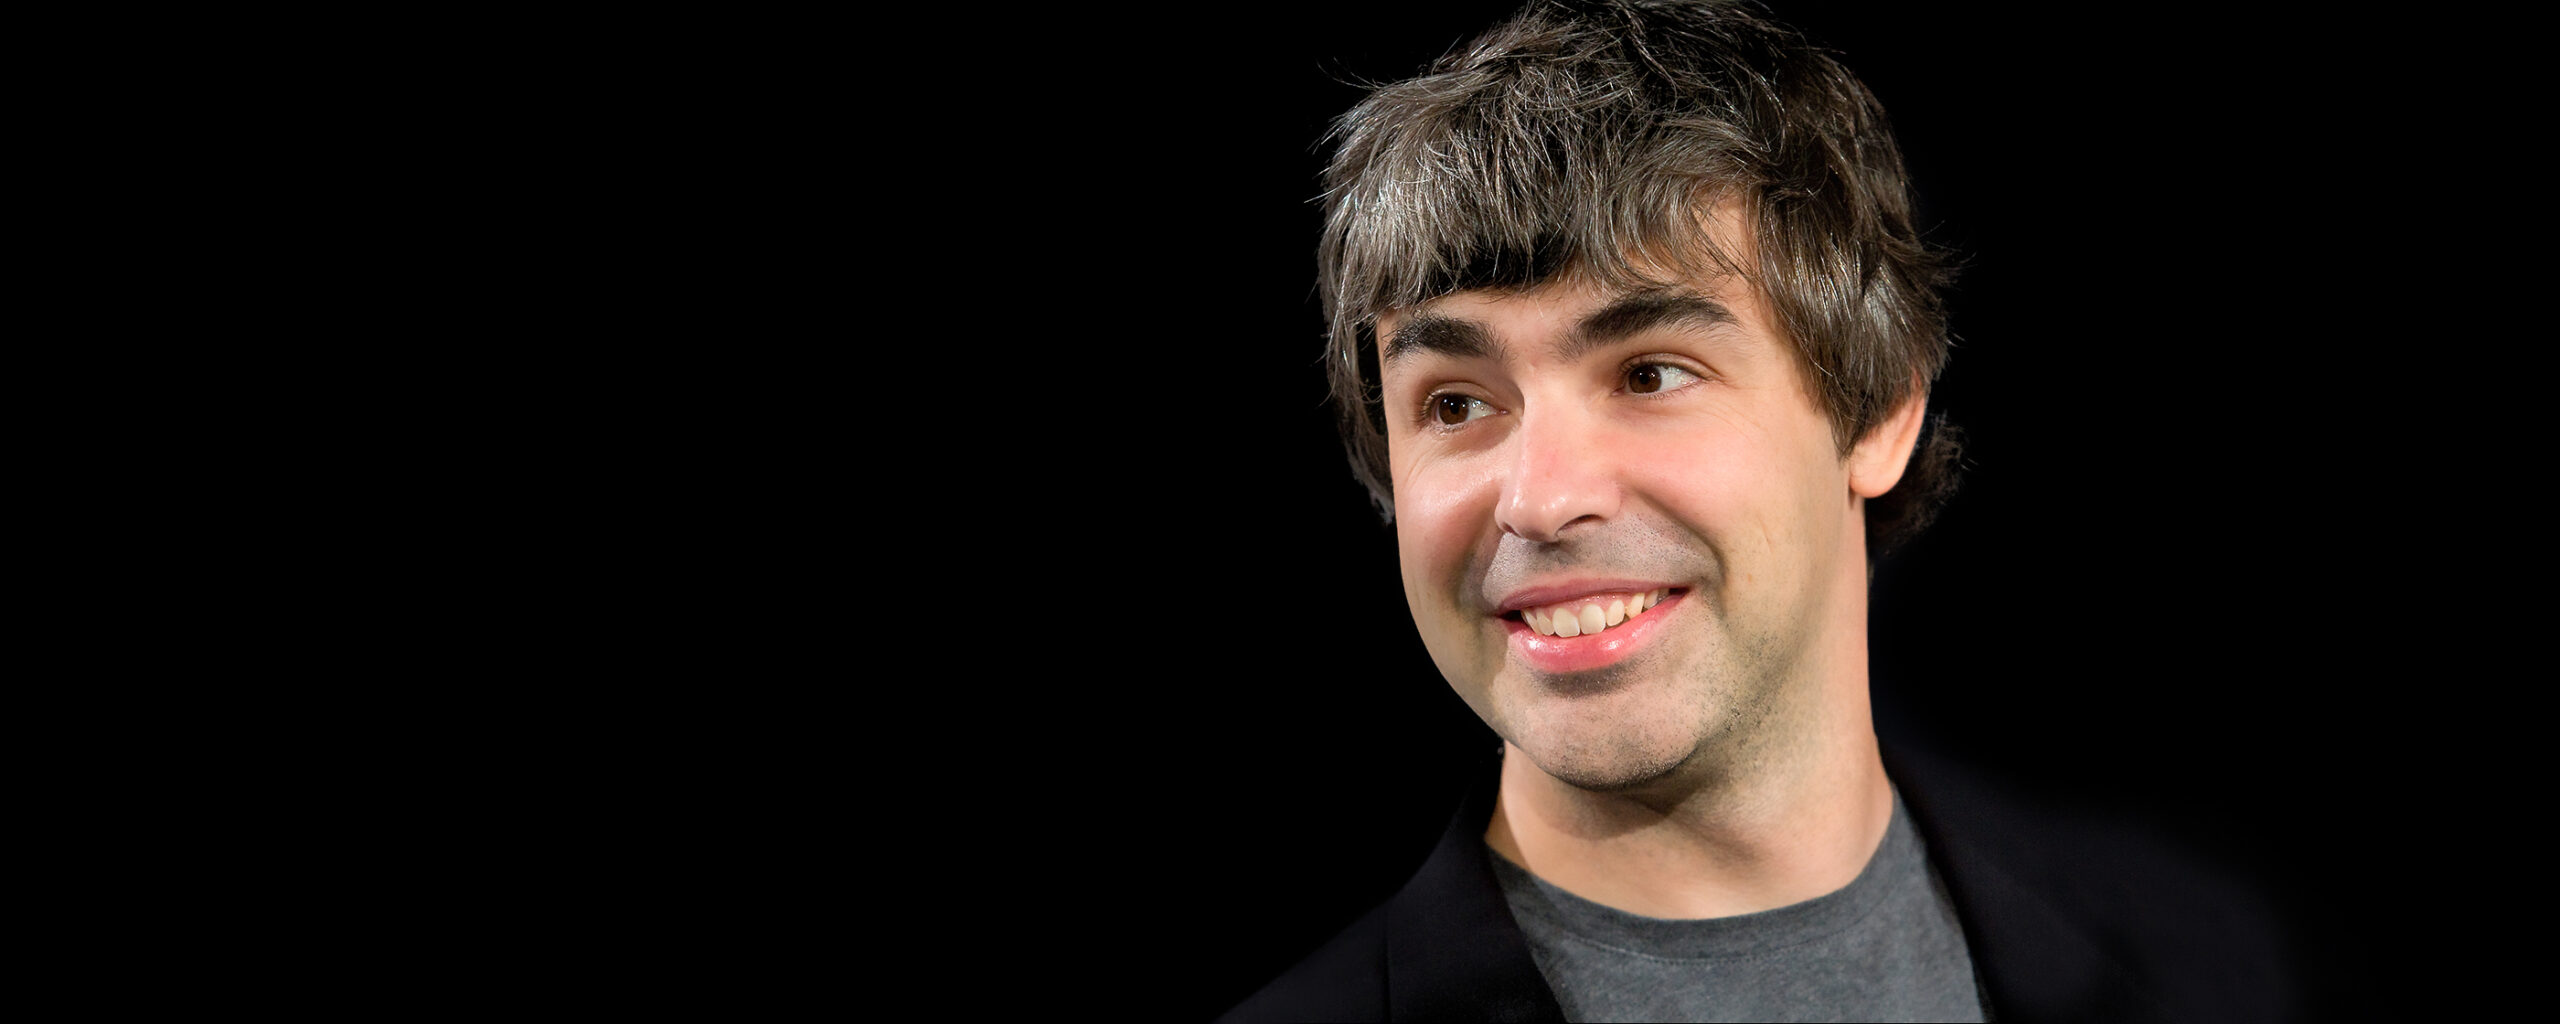 Larry Page - The Innovator Behind Google